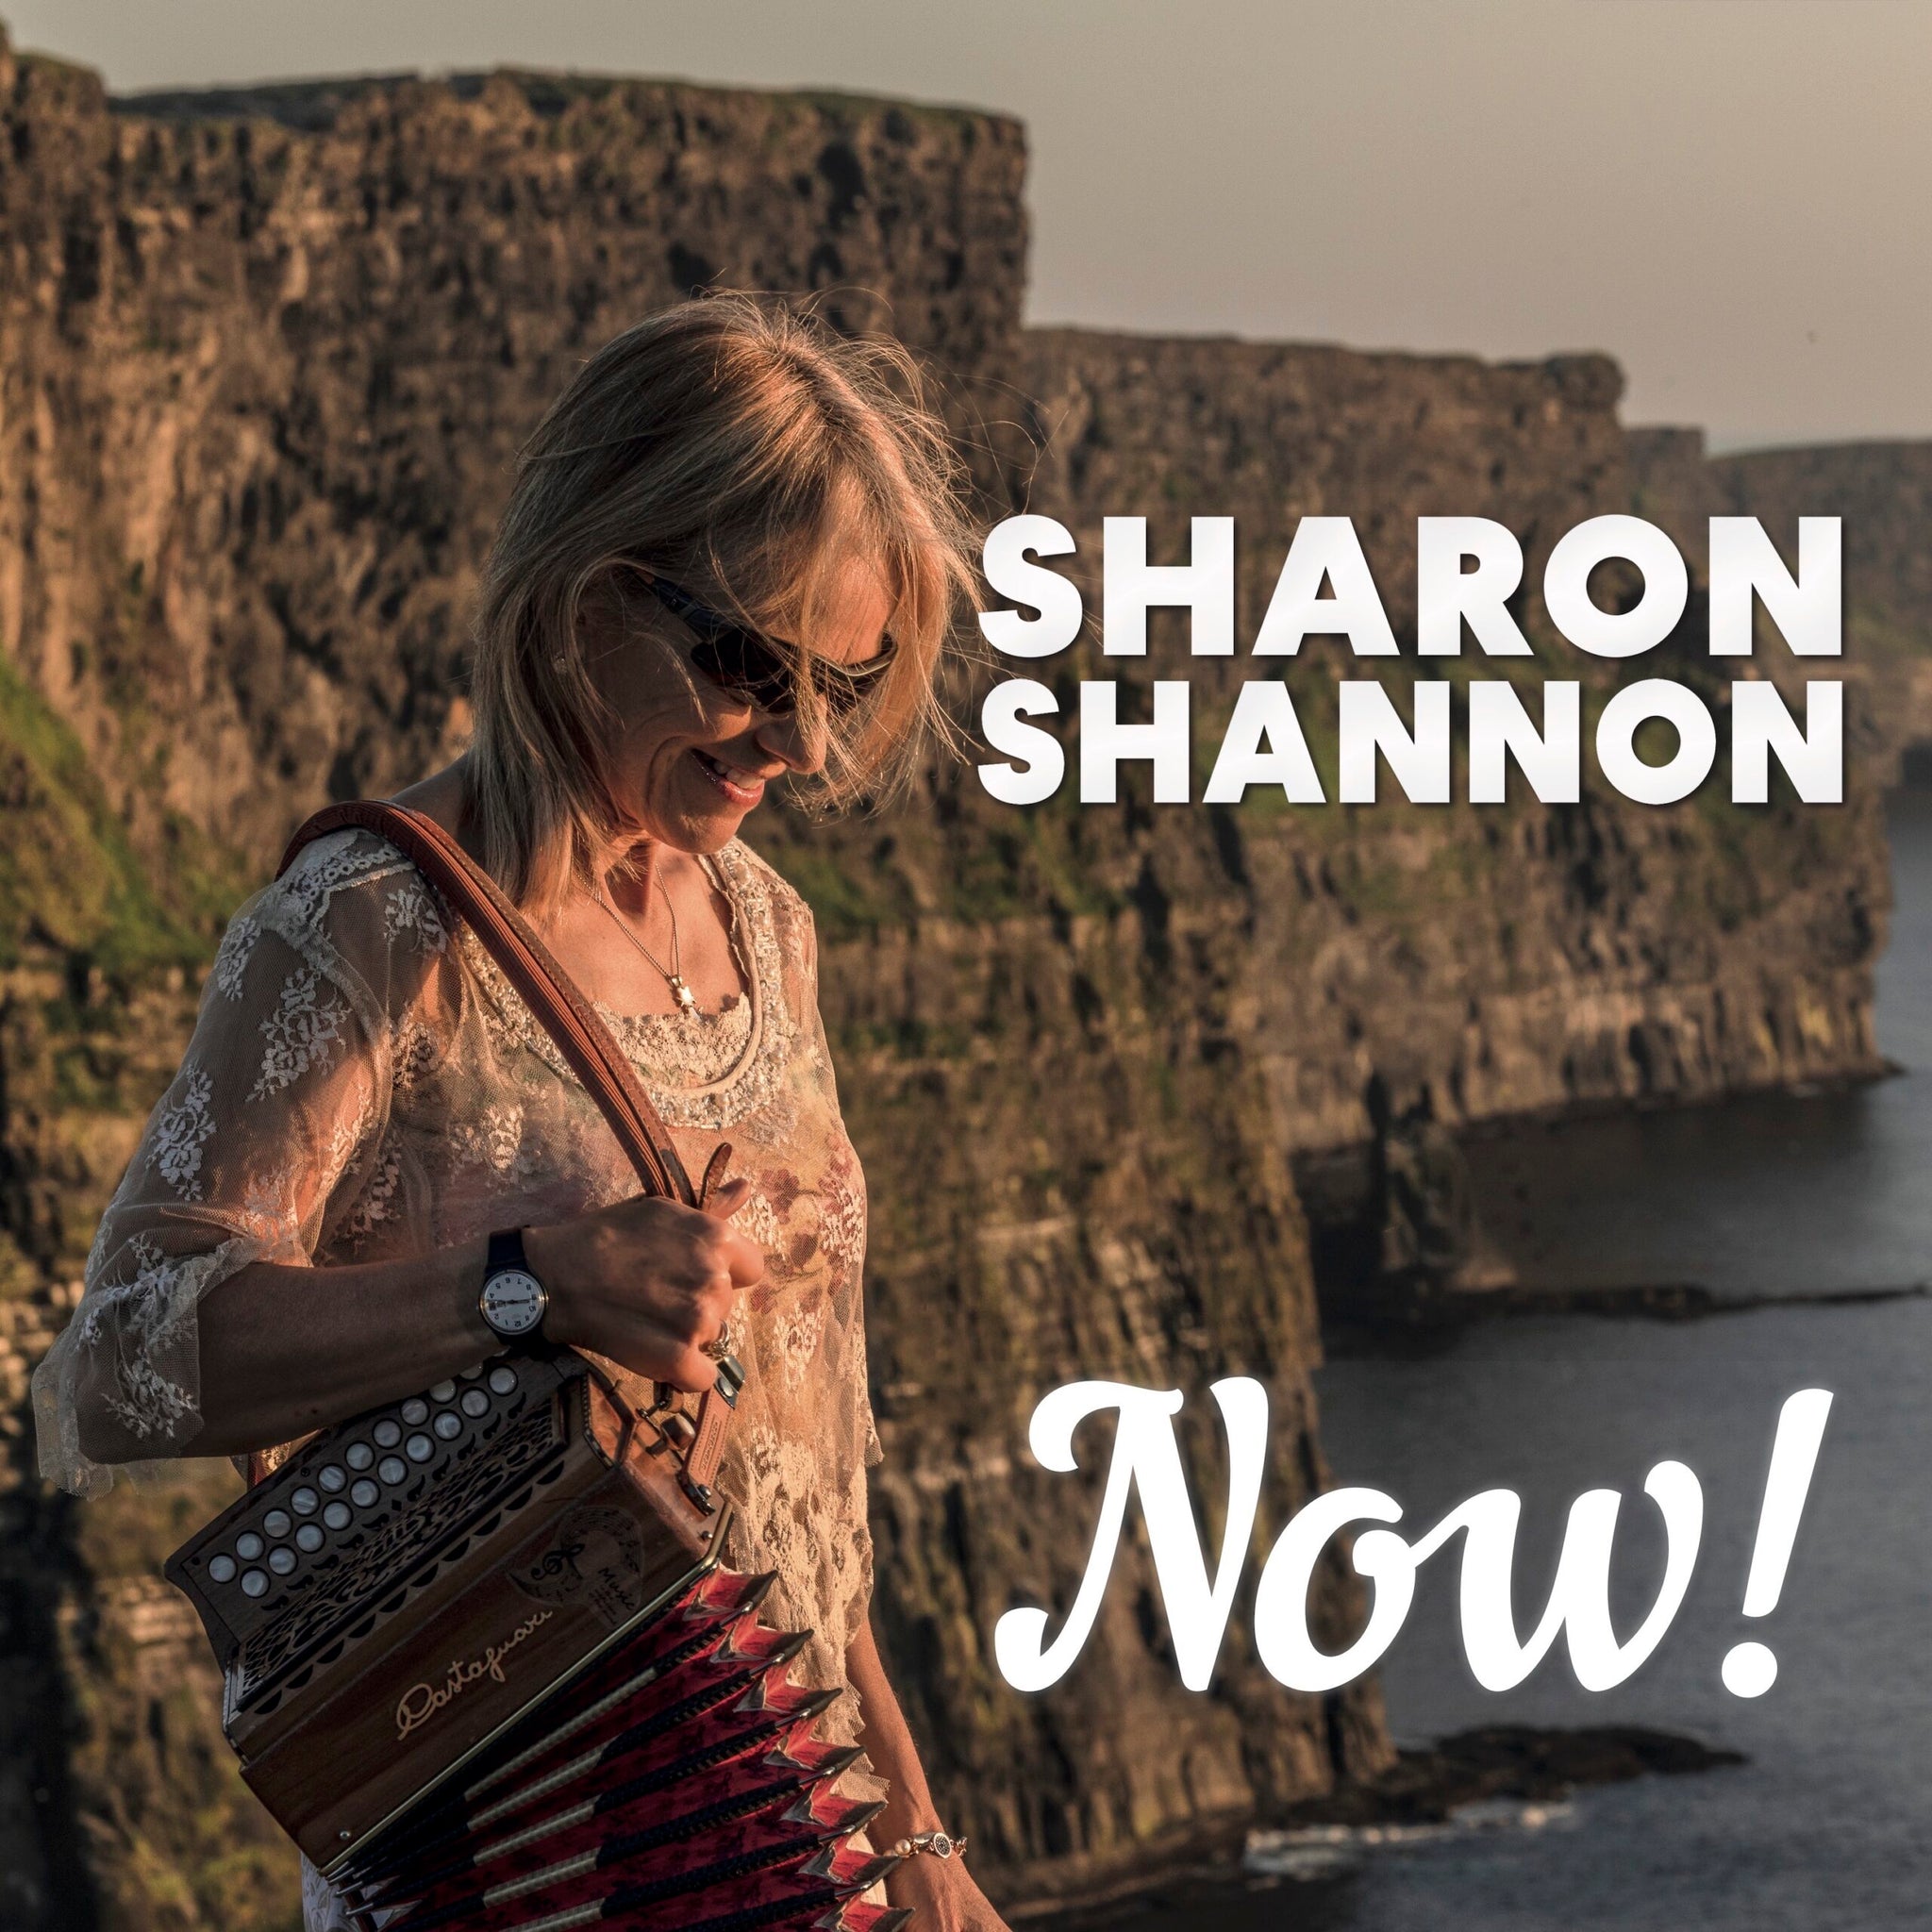 SHARON SHANNON - Now! - CD [MAY 3]